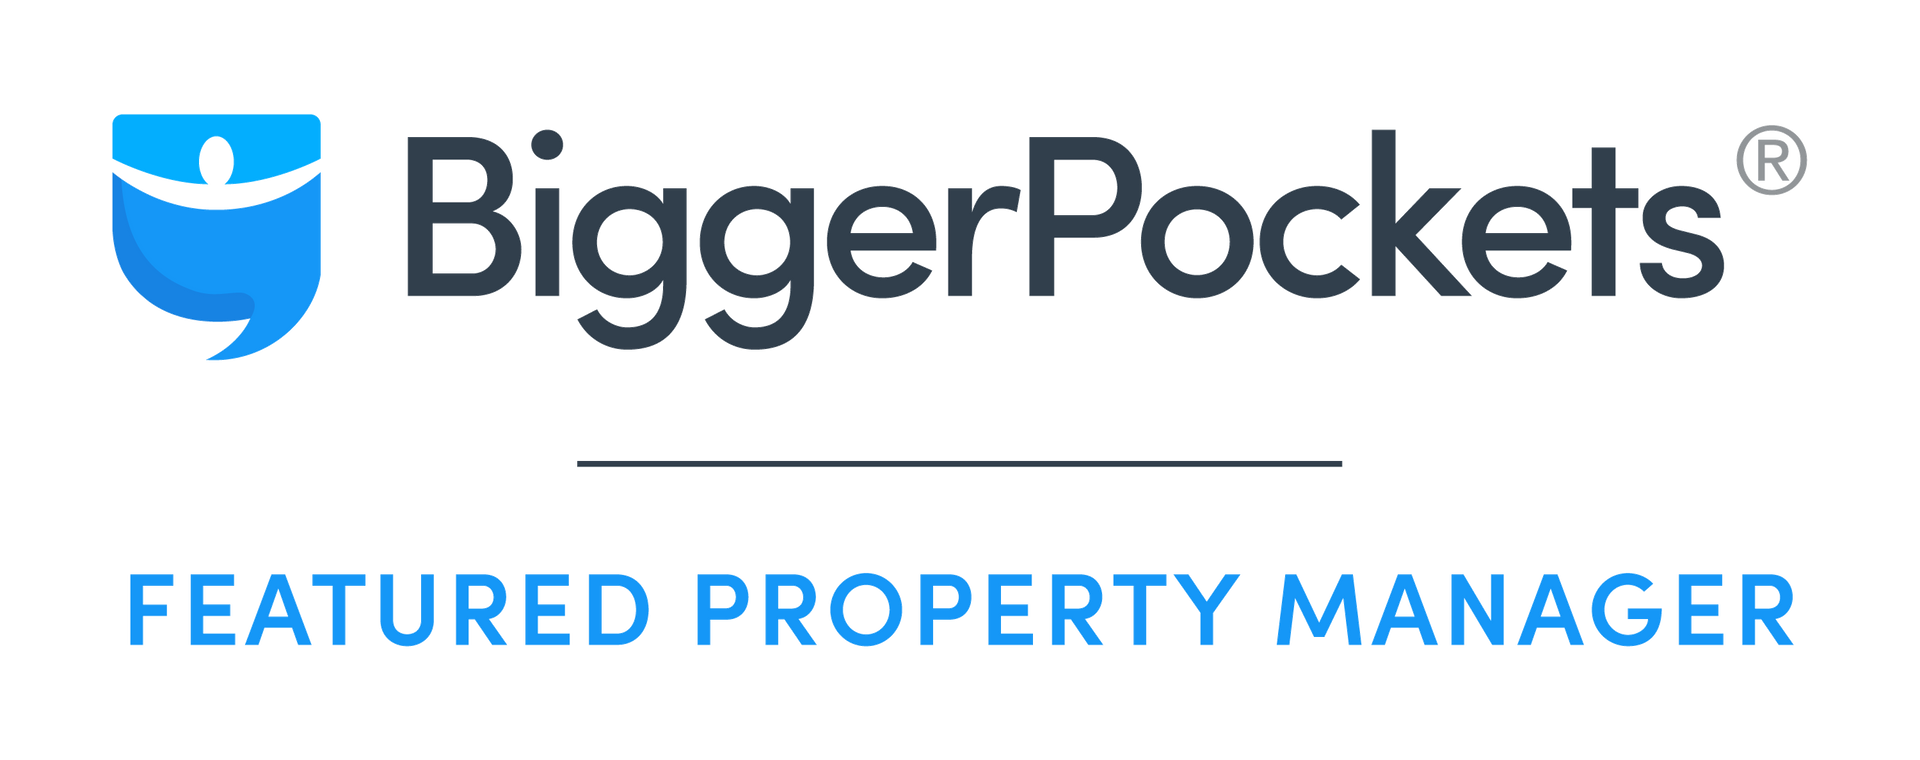 Blue shield icon with 'BiggerPockets' logo, featuring 'Featured Property Manager' banner below.
